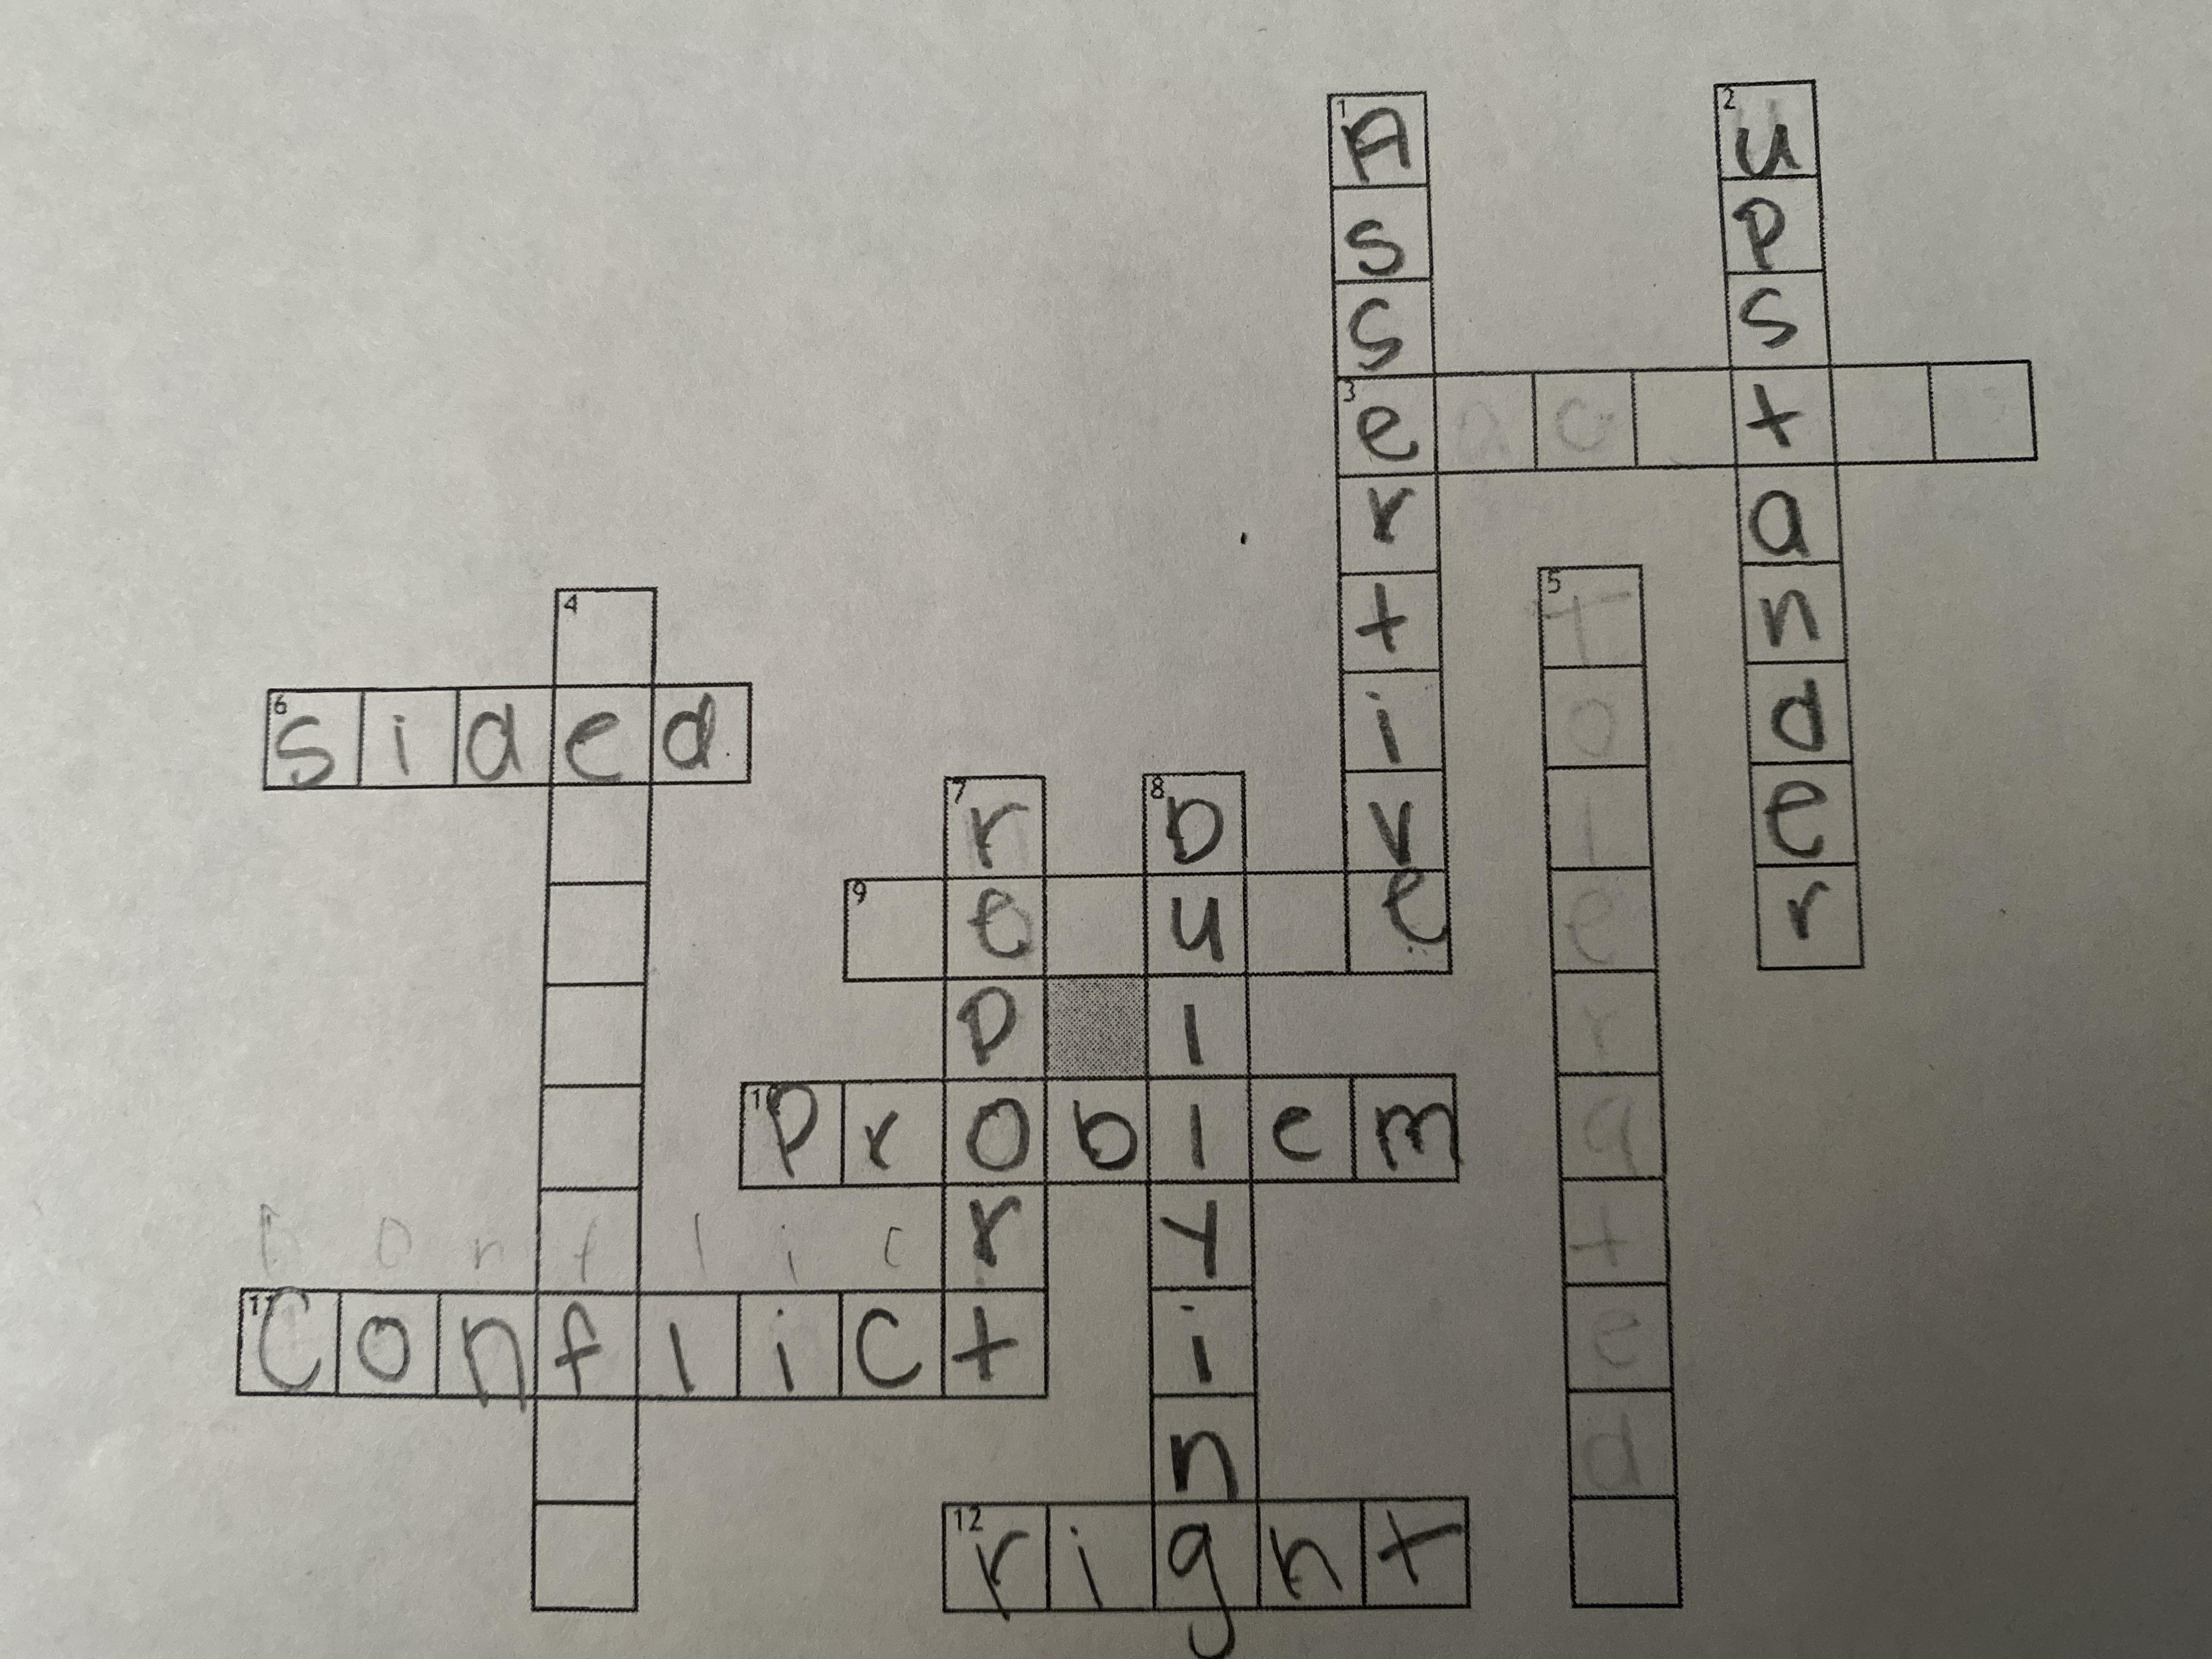 IGNORE WRITING! Can Someone Help Me Solve This Crossword Puzzle?